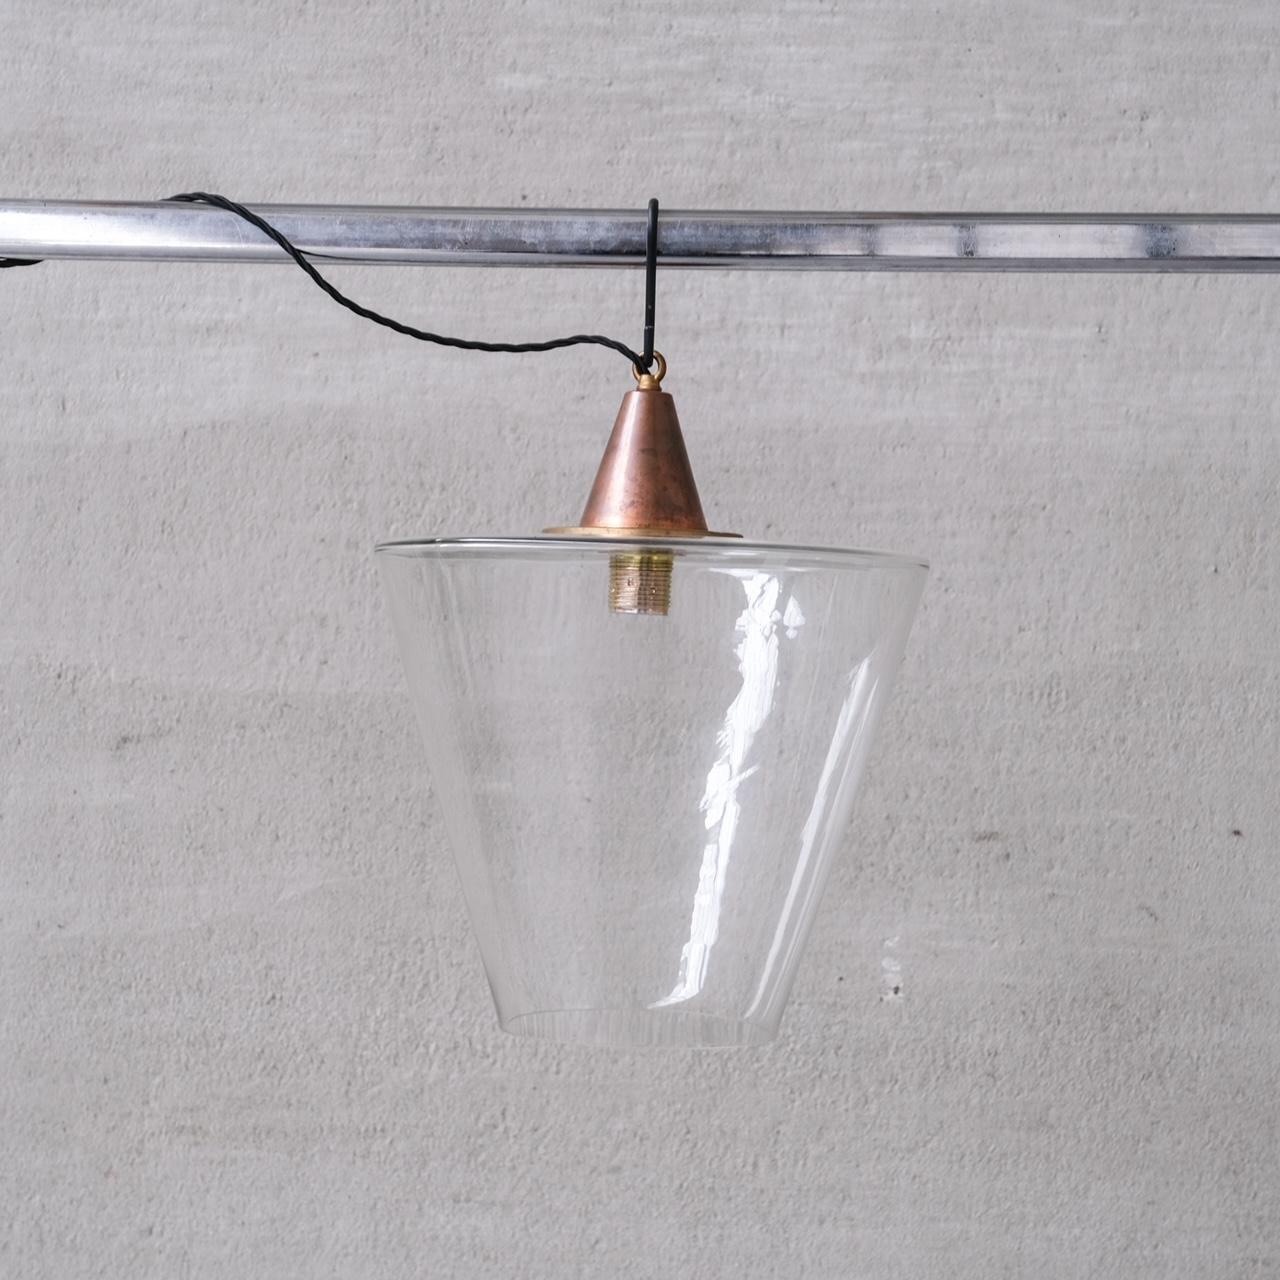 A larger sized clear glass pendant.

France, c1950s.

Copper gallery.

Conical base with open bottom.

Since re-wired and PAT tested.

Good vintage condition, some scuffs and wear commensurate with age.

Internal Ref: 18/10/23/009.

Location: